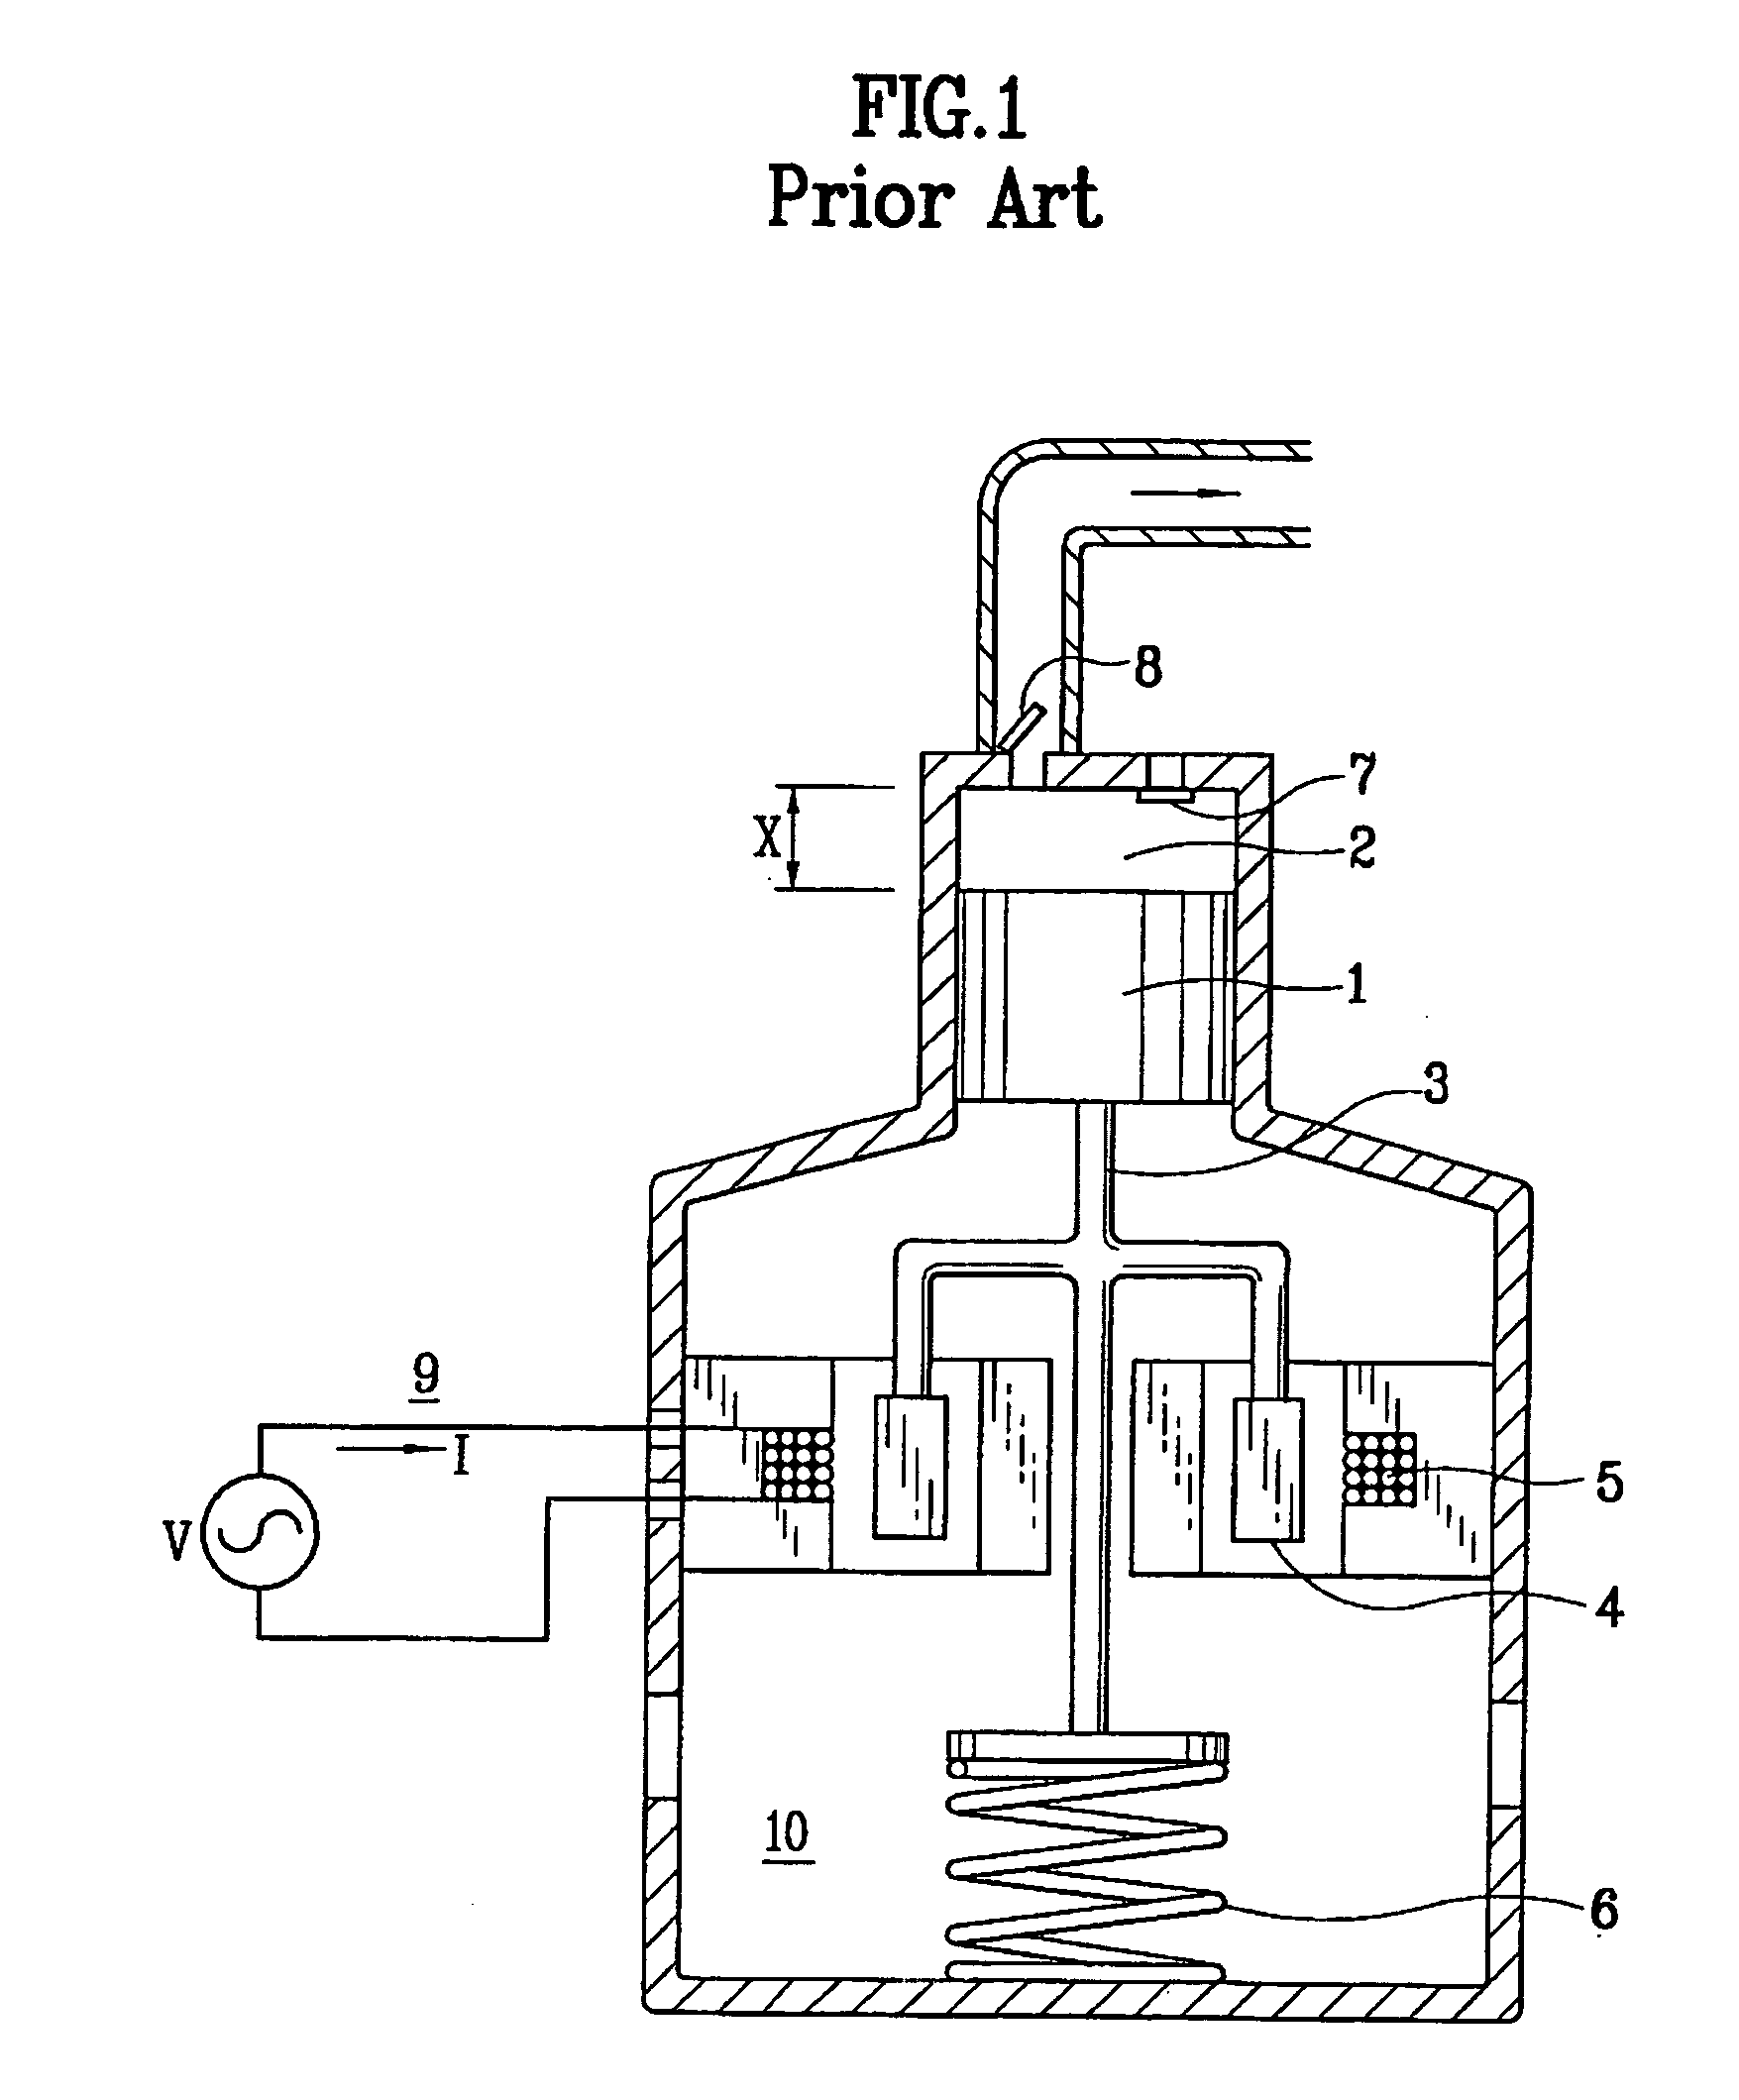 Apparatus and method for controlling a reciprocating compressor